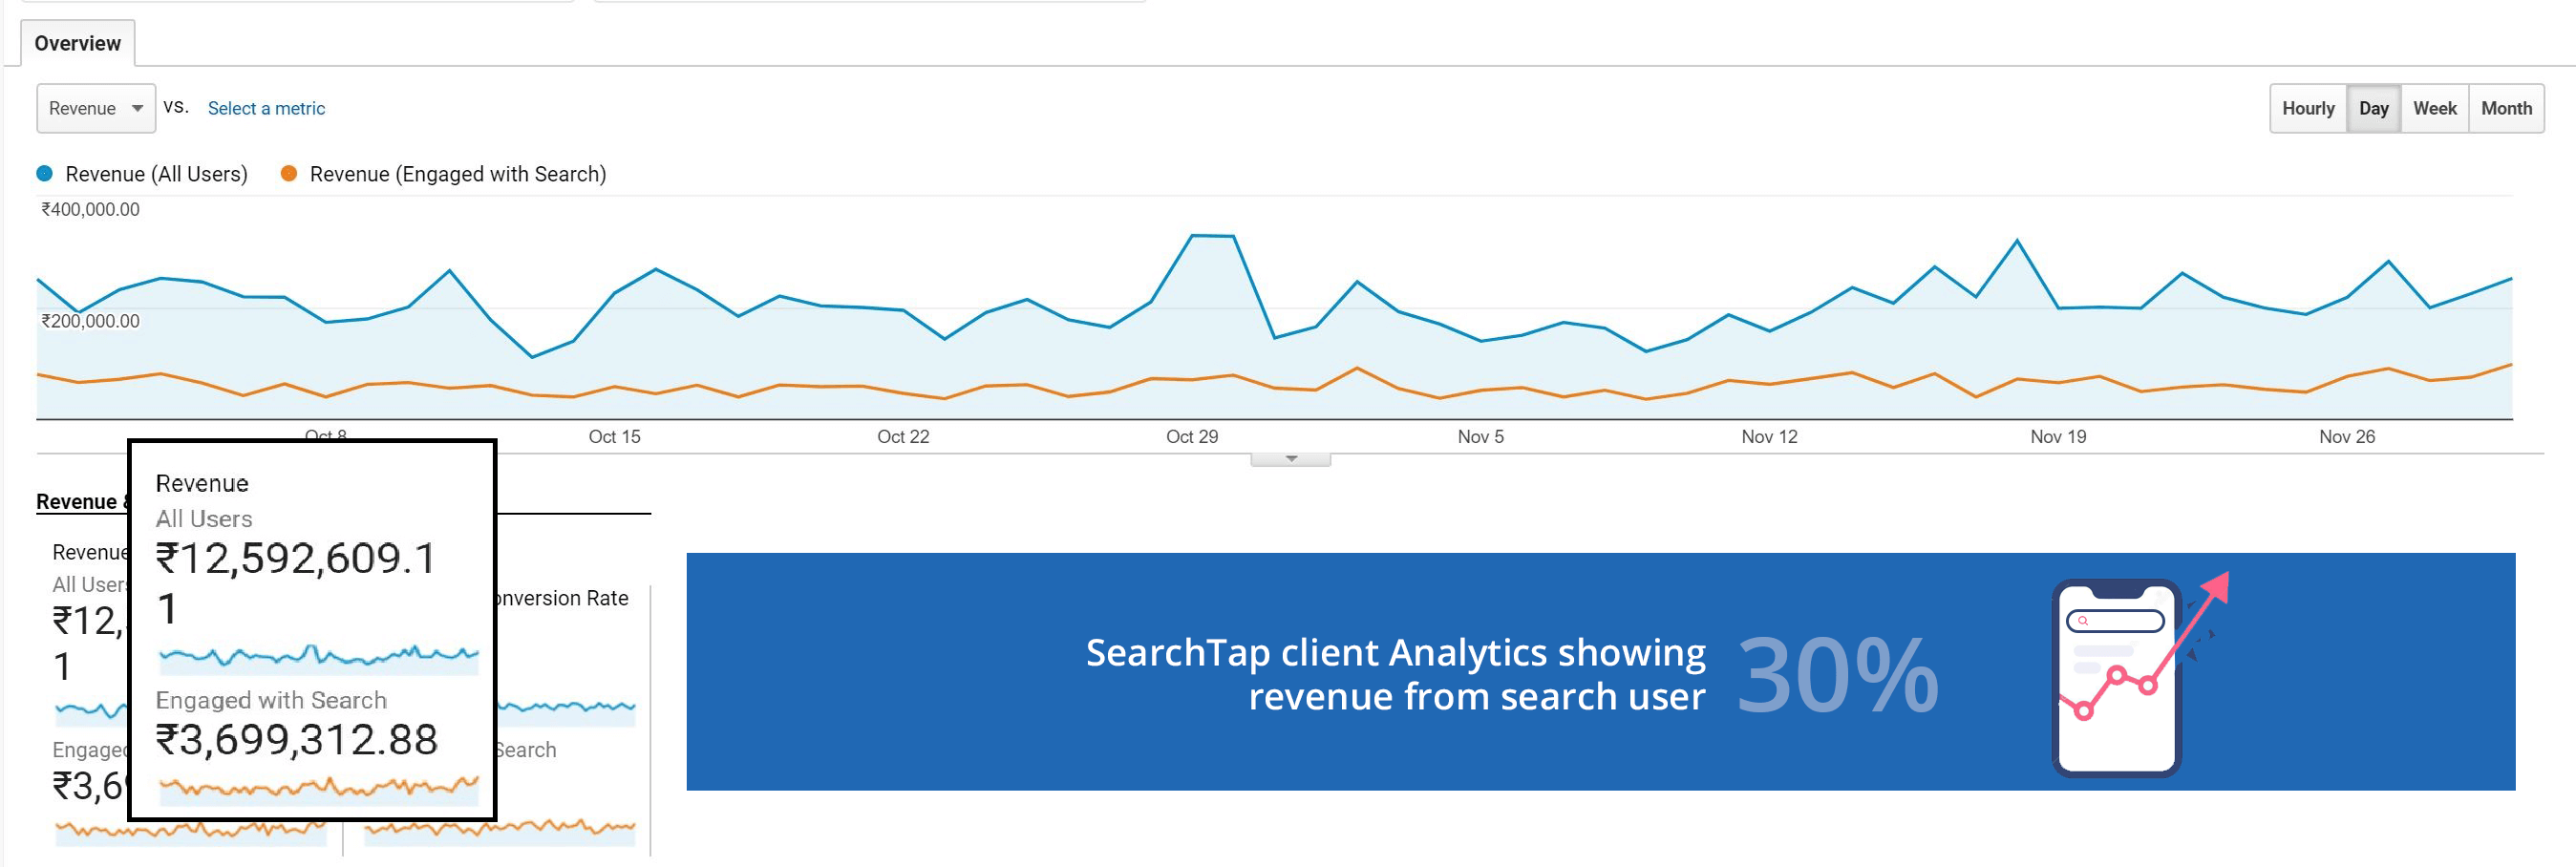 SearchTap Clients Analytics